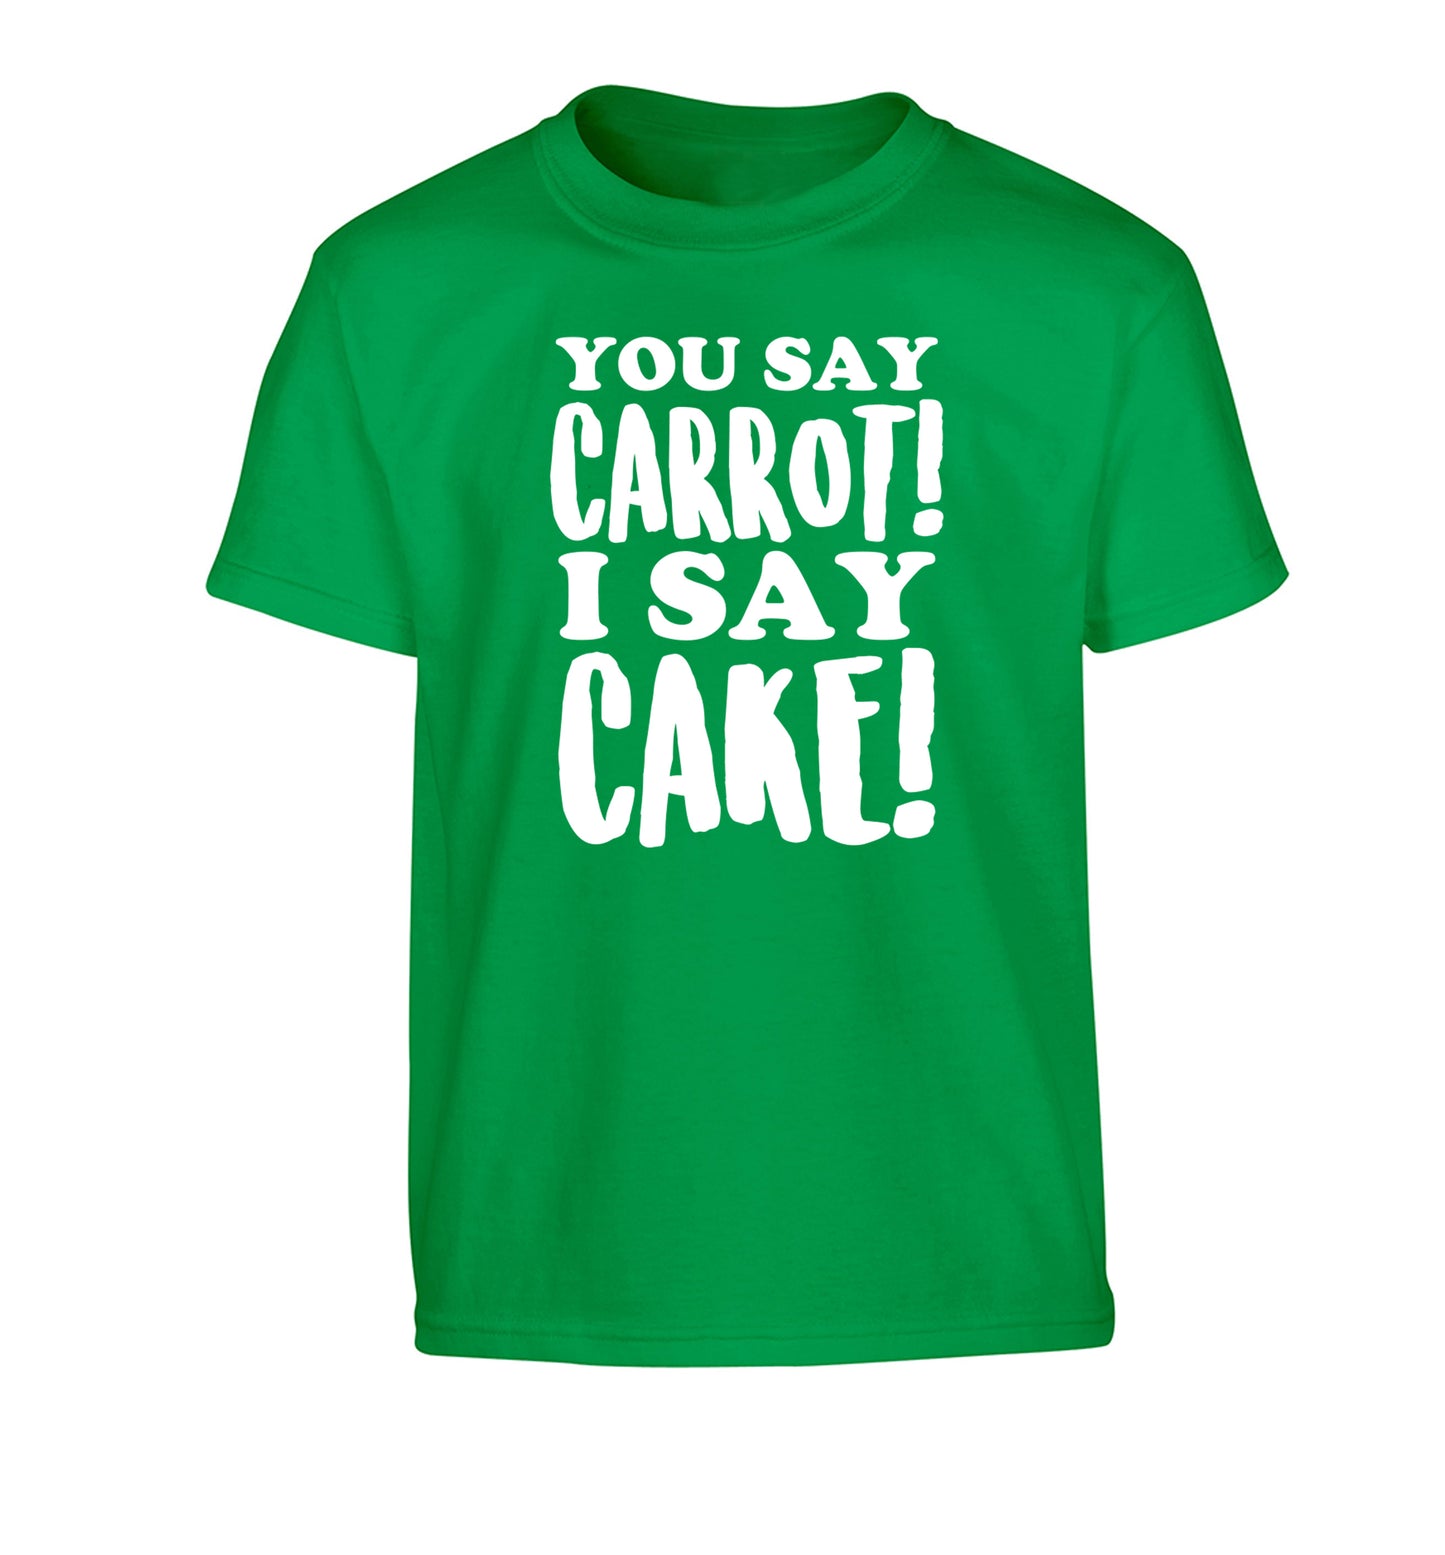 You say carrot I say cake! Children's green Tshirt 12-14 Years